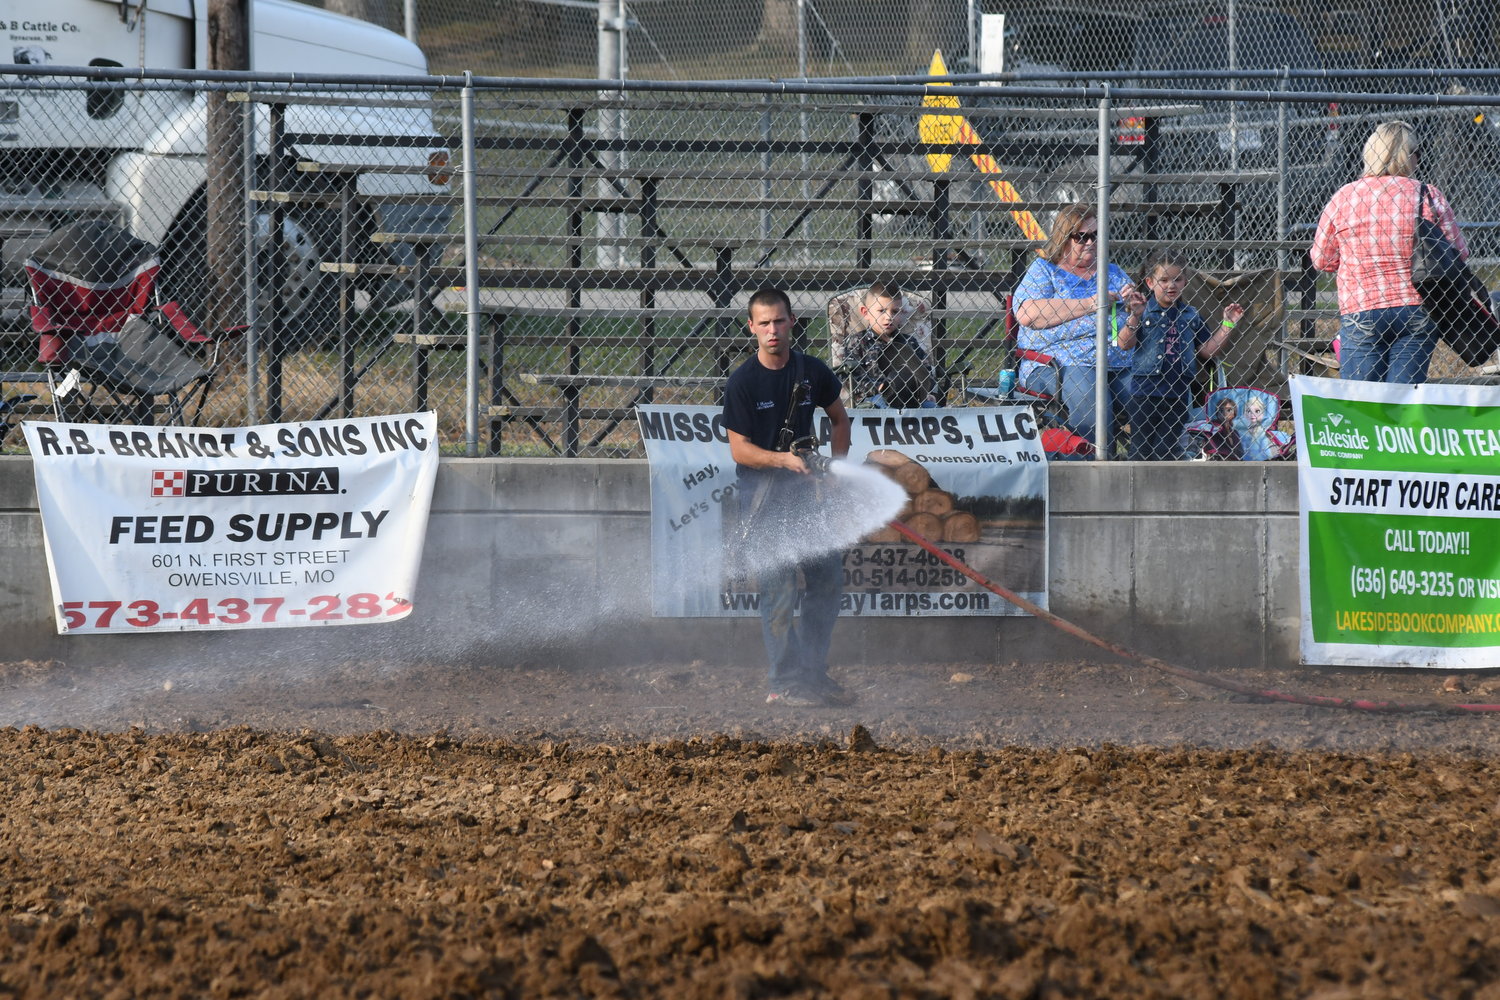 Double B Rough Stock provided the competitors and livestock for the rodeo —Owensville’s volunteer firemen provided the dust control for the arena.